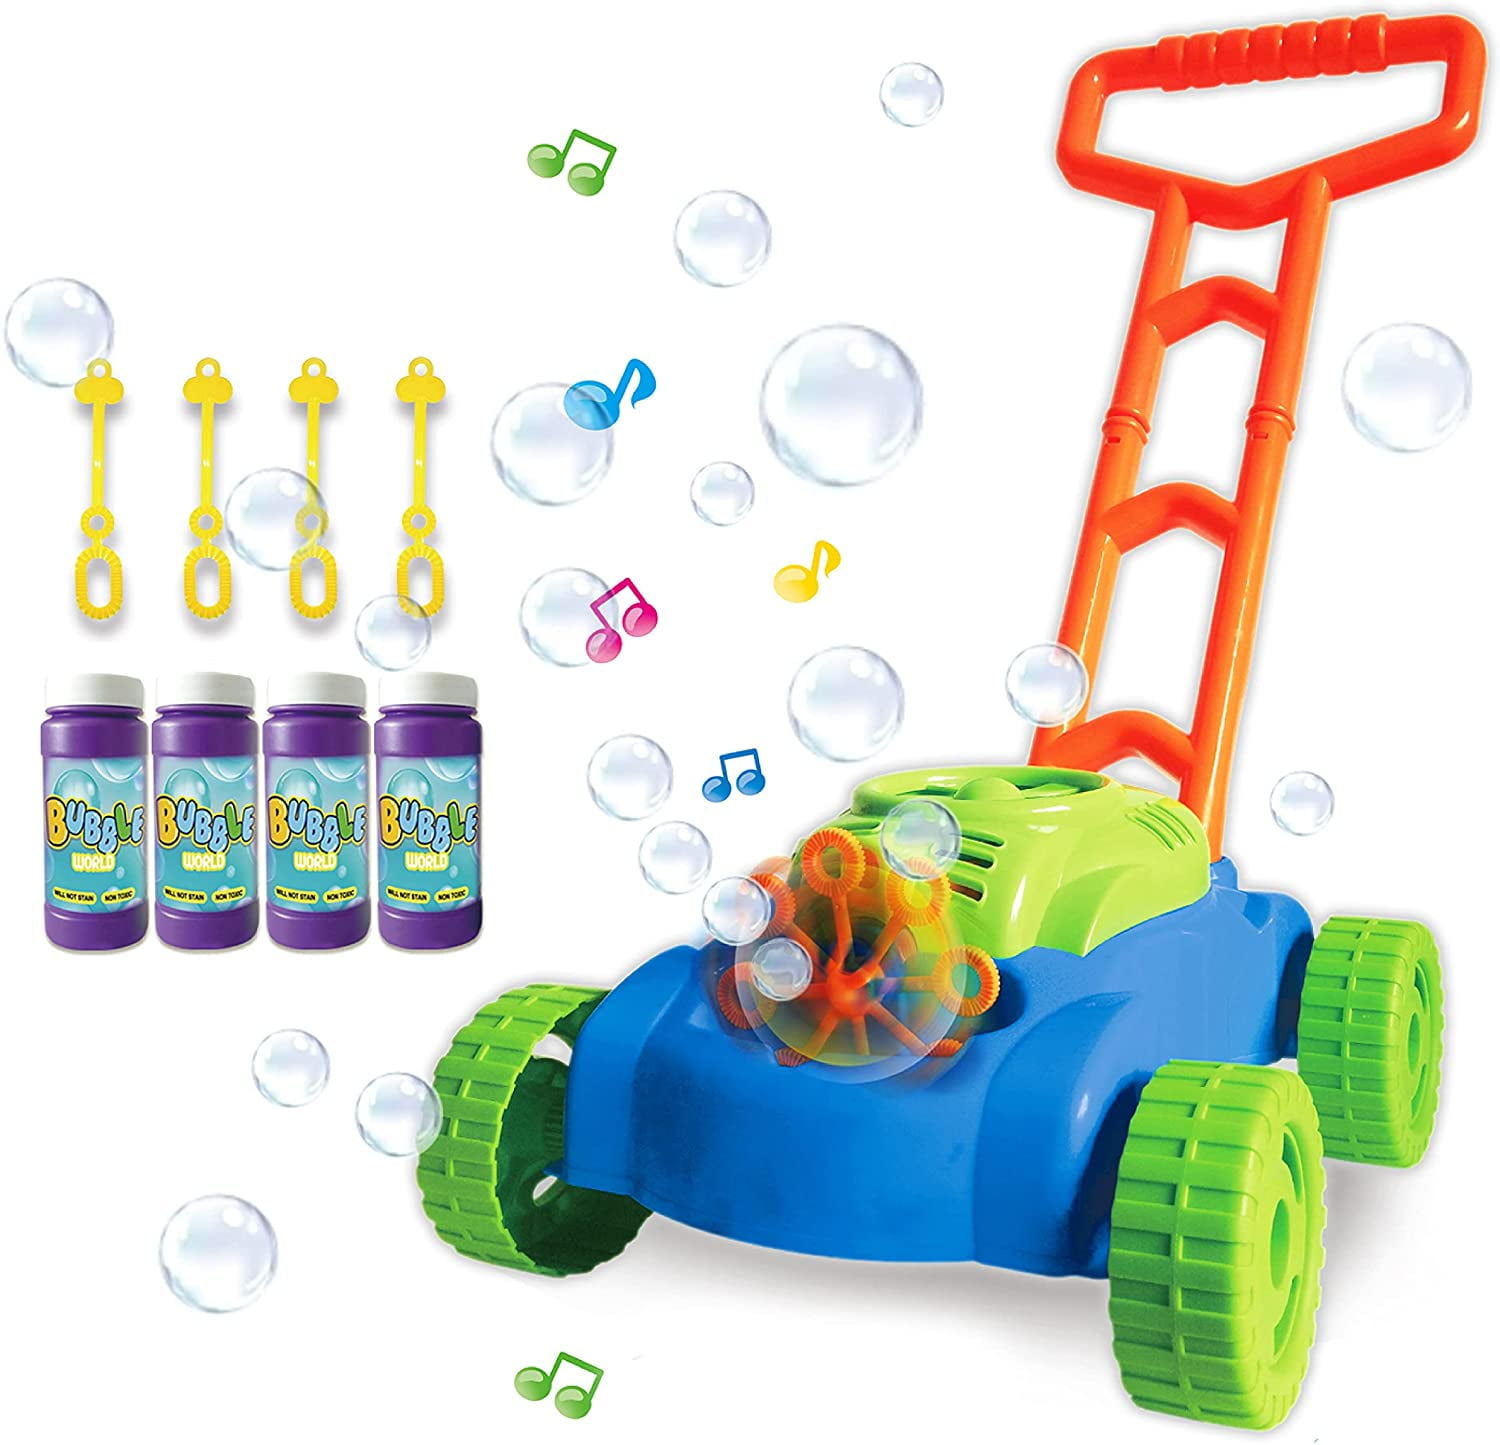 Hedgbobo Music Bubble Lawn Mower Electronic Bubble Blowing Mover Outdoor Push 783761429463